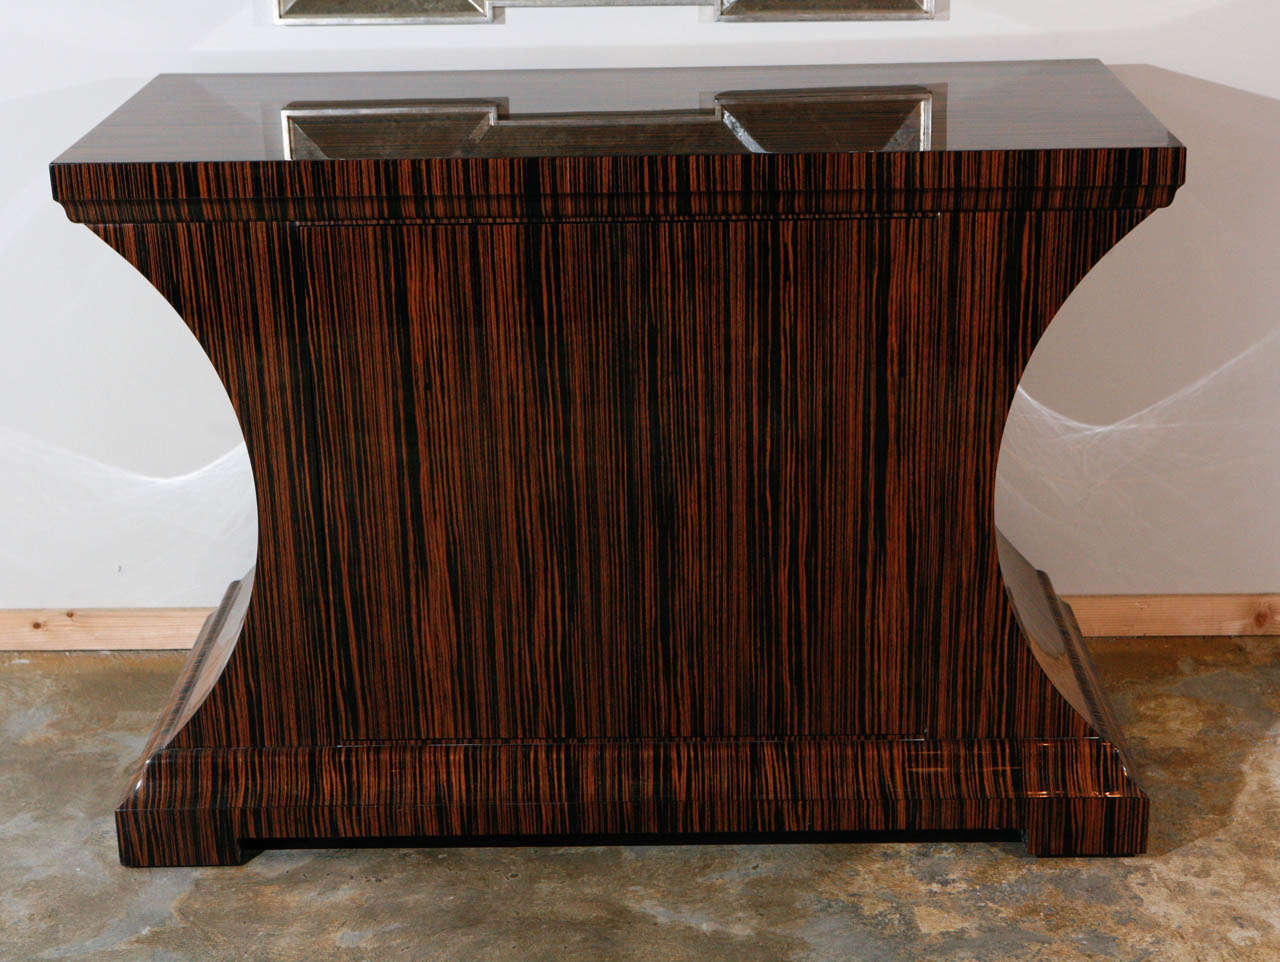 Macassar Art Deco style cabinet that can be utilized as a dry bar or buffet. Inquire for availability.